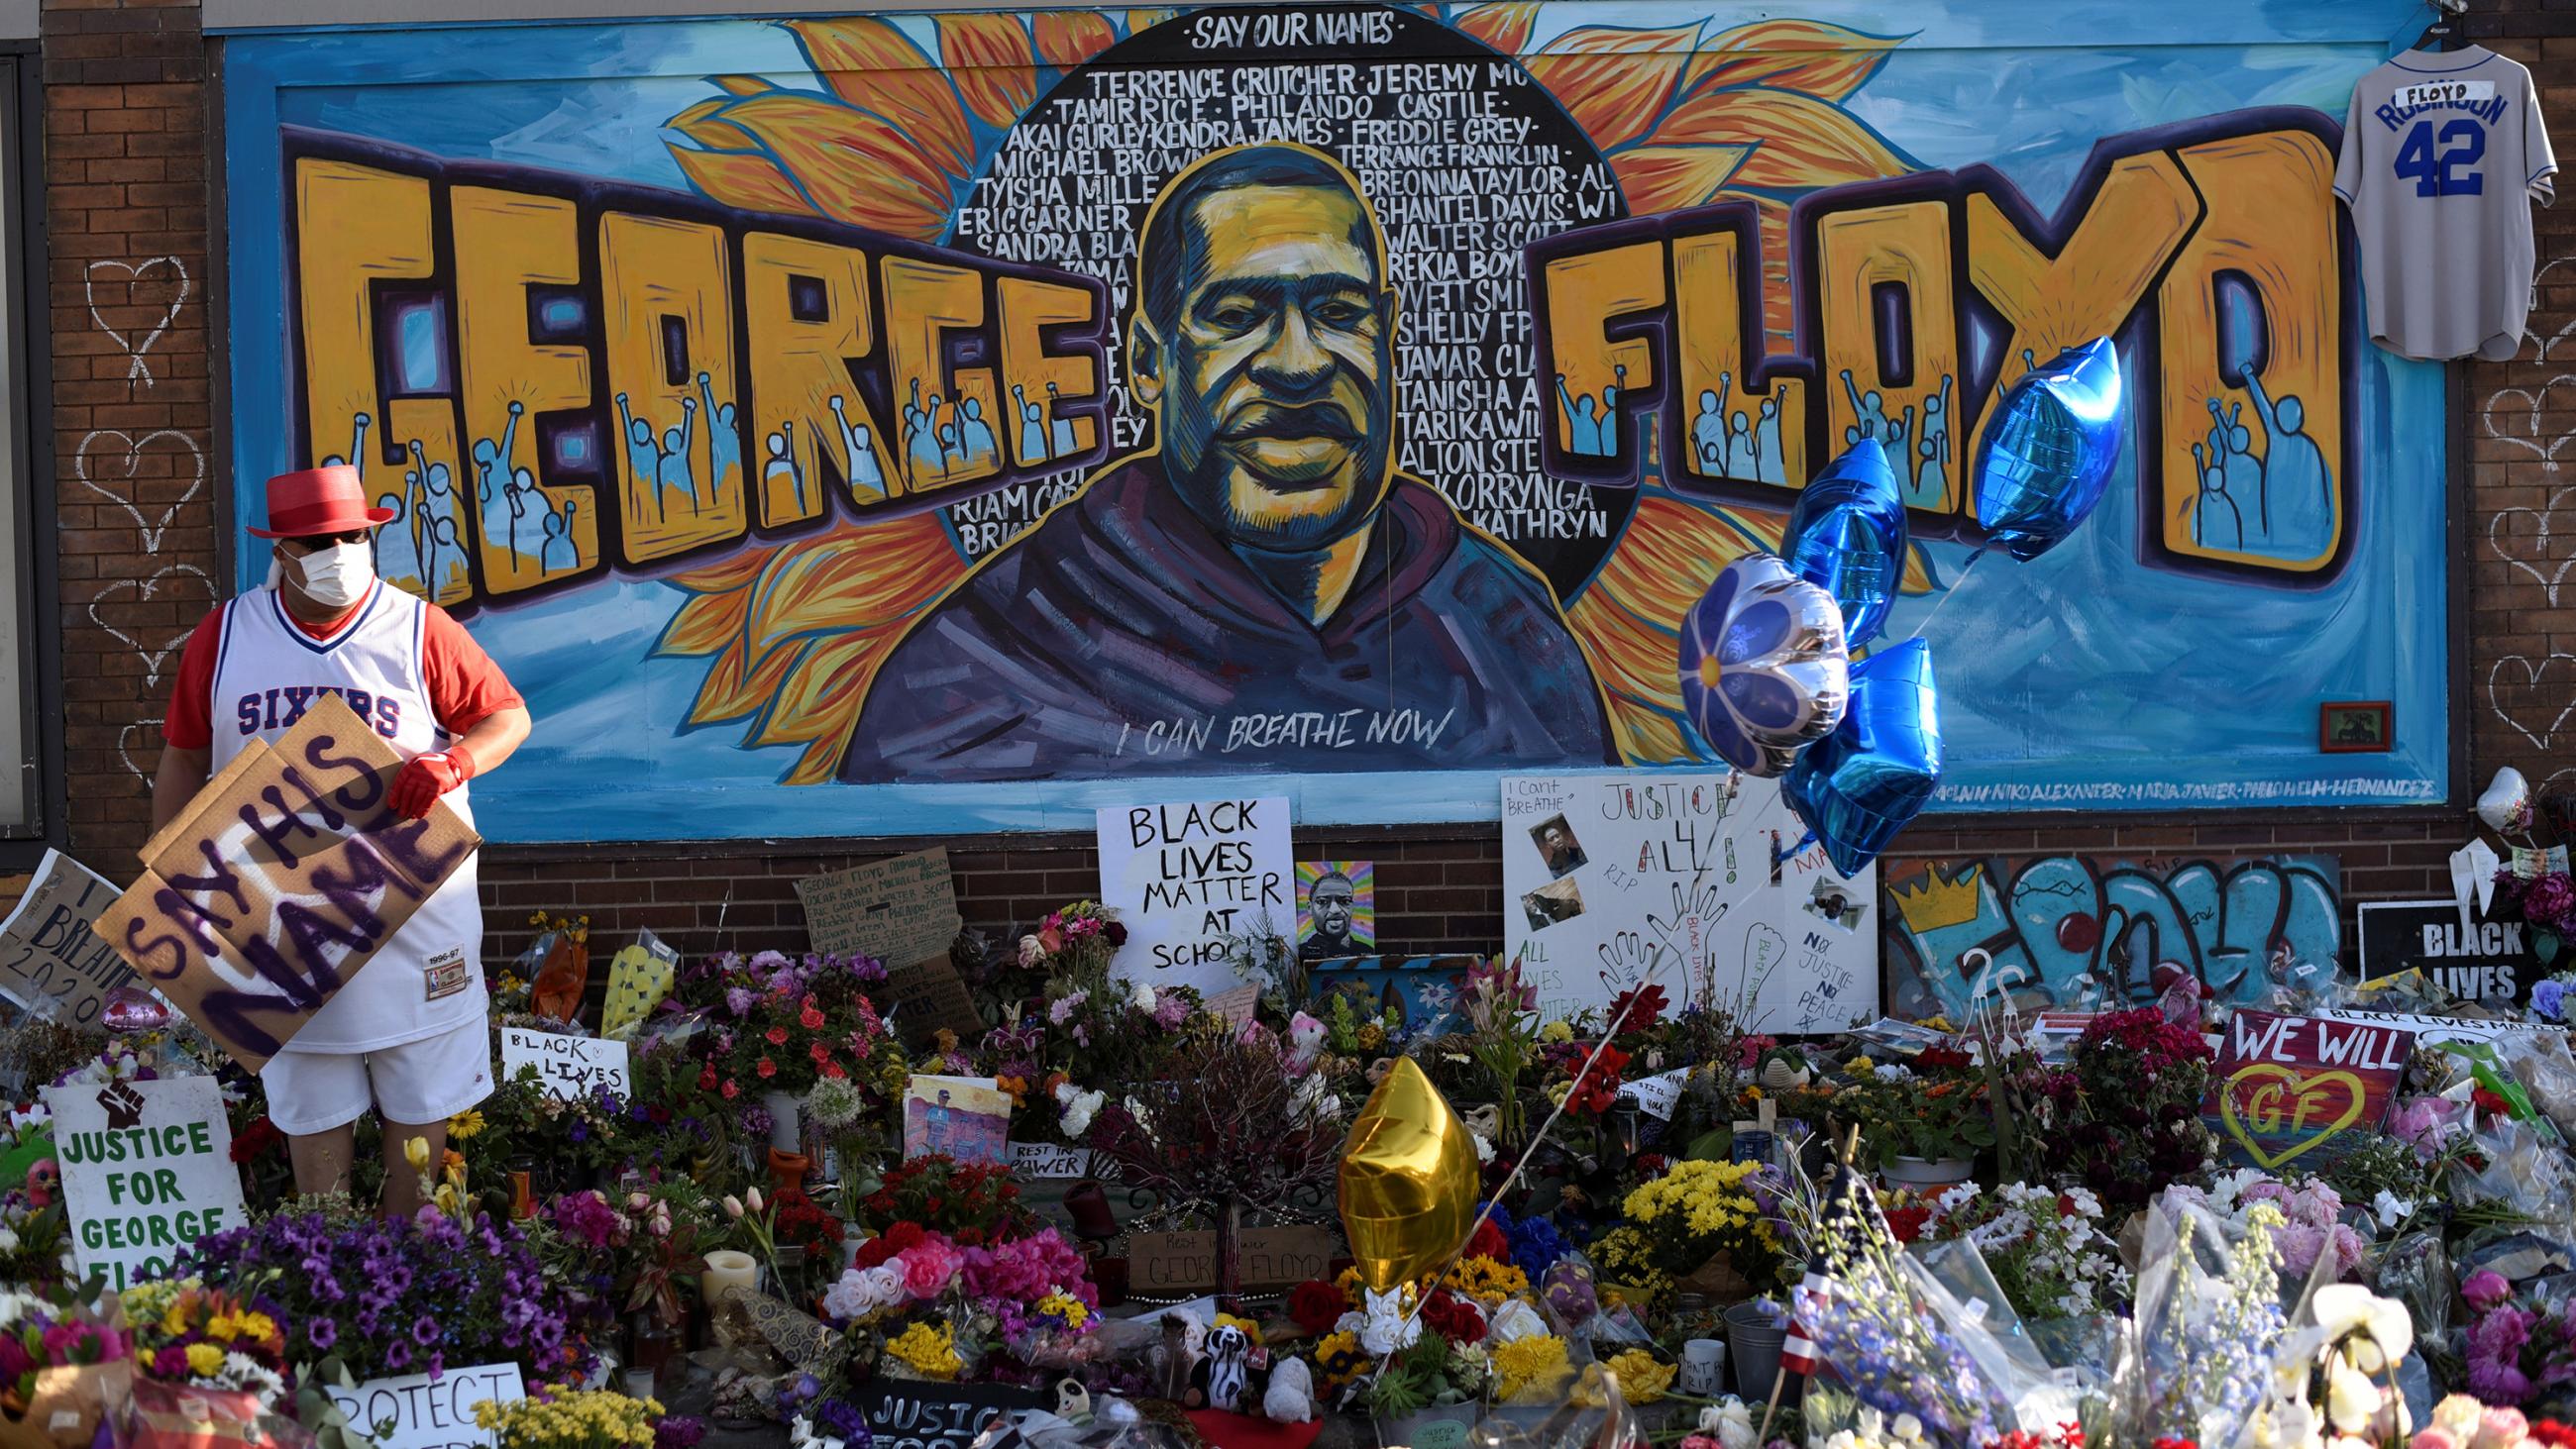 The photo shows a mural to Floyd with lots of flowers and signs laid out in front. 